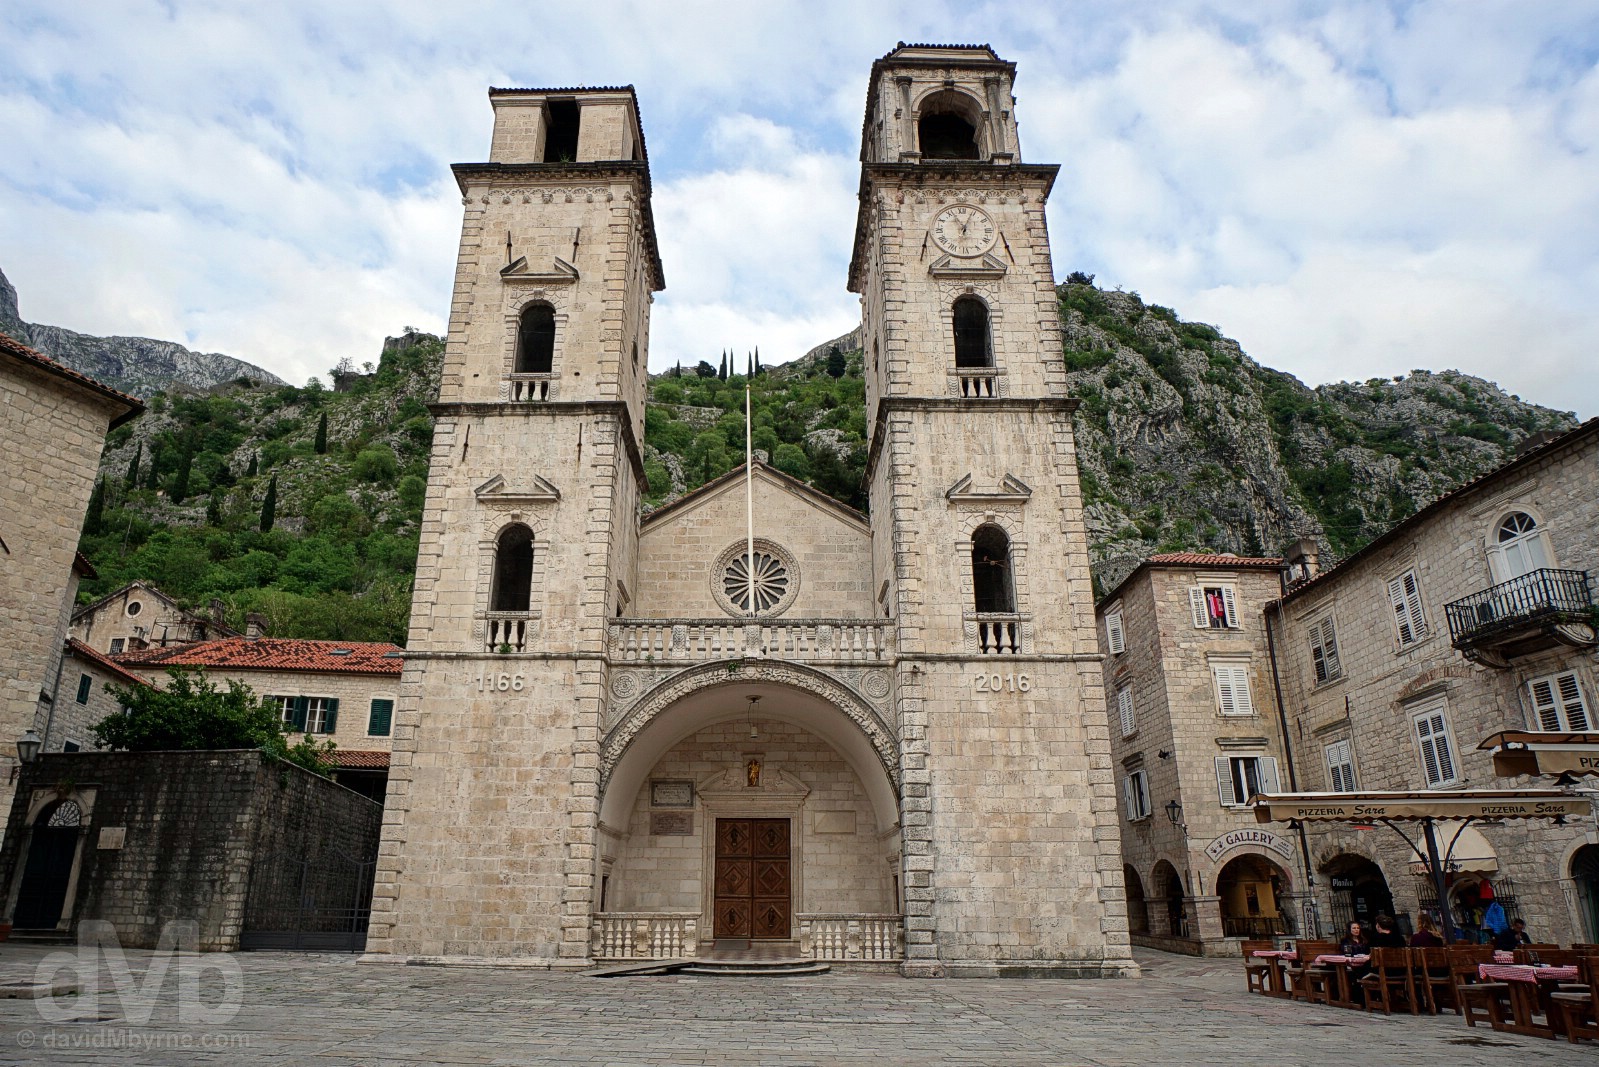 The Cathedral of St. Tryphon, Trg sv. Tripuna (St. Tryphon's Square), Stari Grad (Old Town), Kotor, Montenegro. April 19, 2017.